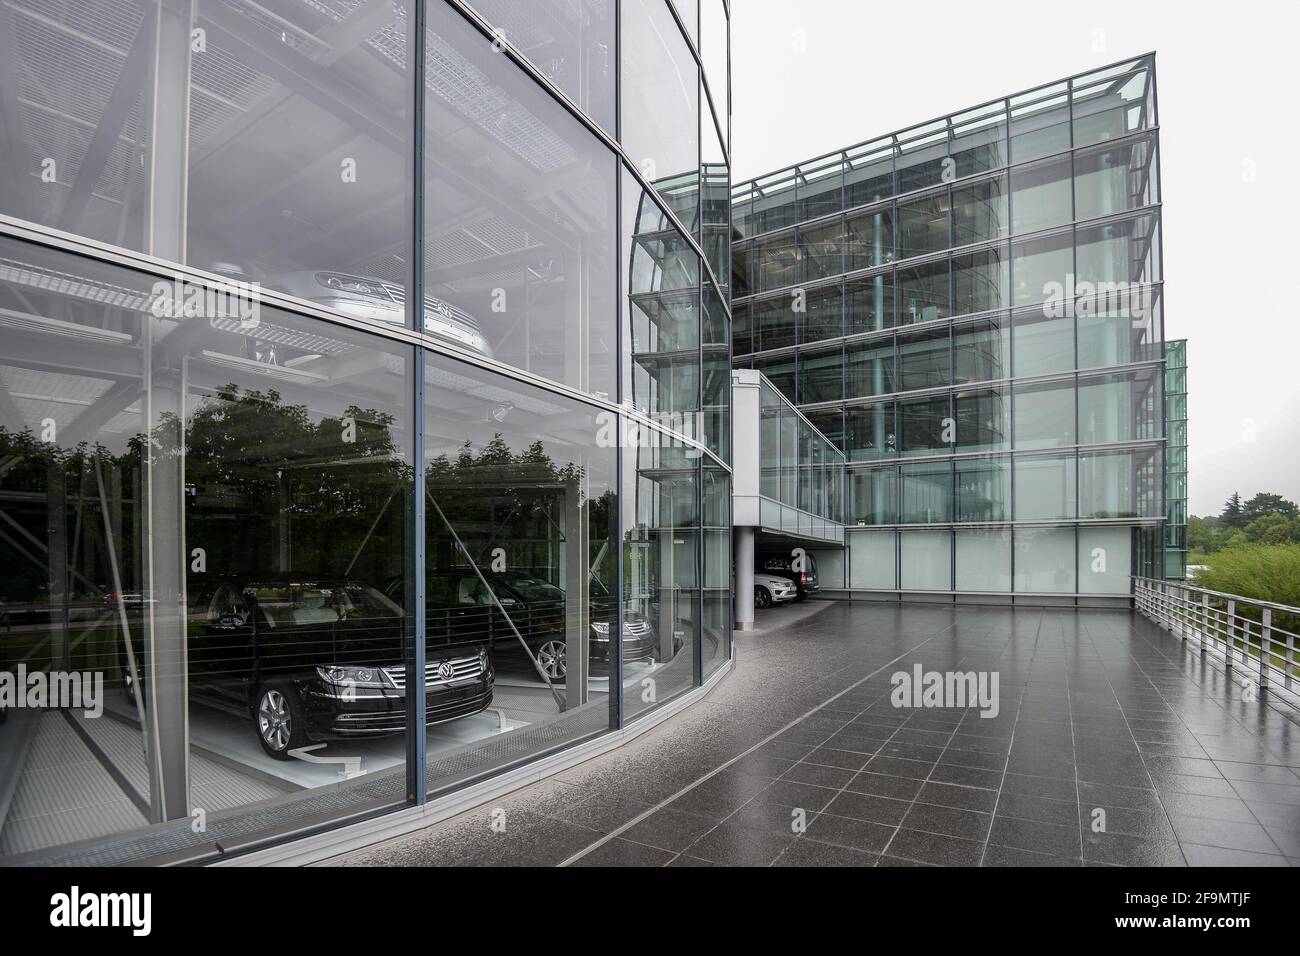 GERMANY DRESDEN - AUGUST 2015: Car in a showroom of the Volkswagen building, car behind glass. Glaeserne Manufaktur. Glass manufactory Volkswagen.  Stock Photo